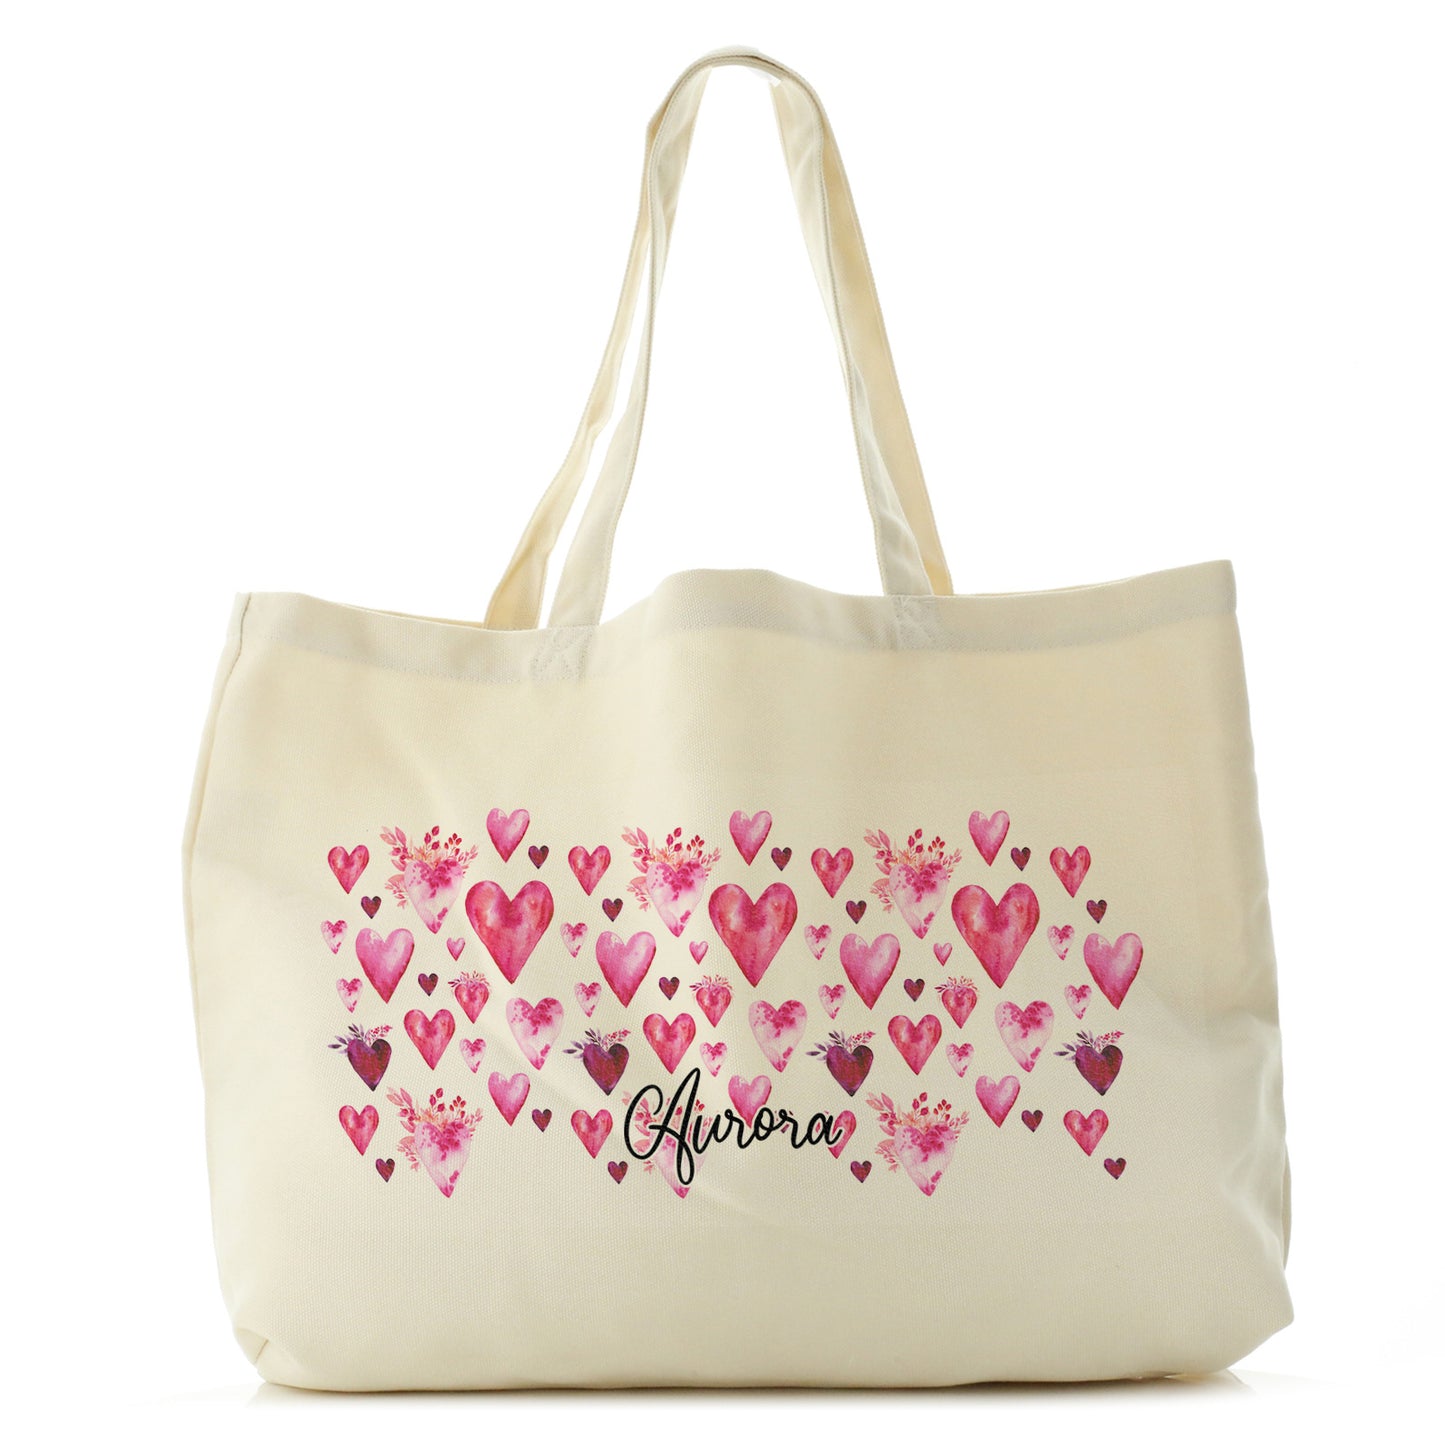 Personalised Canvas Tote Bag with Stylish Text and Valentine Hearts Print